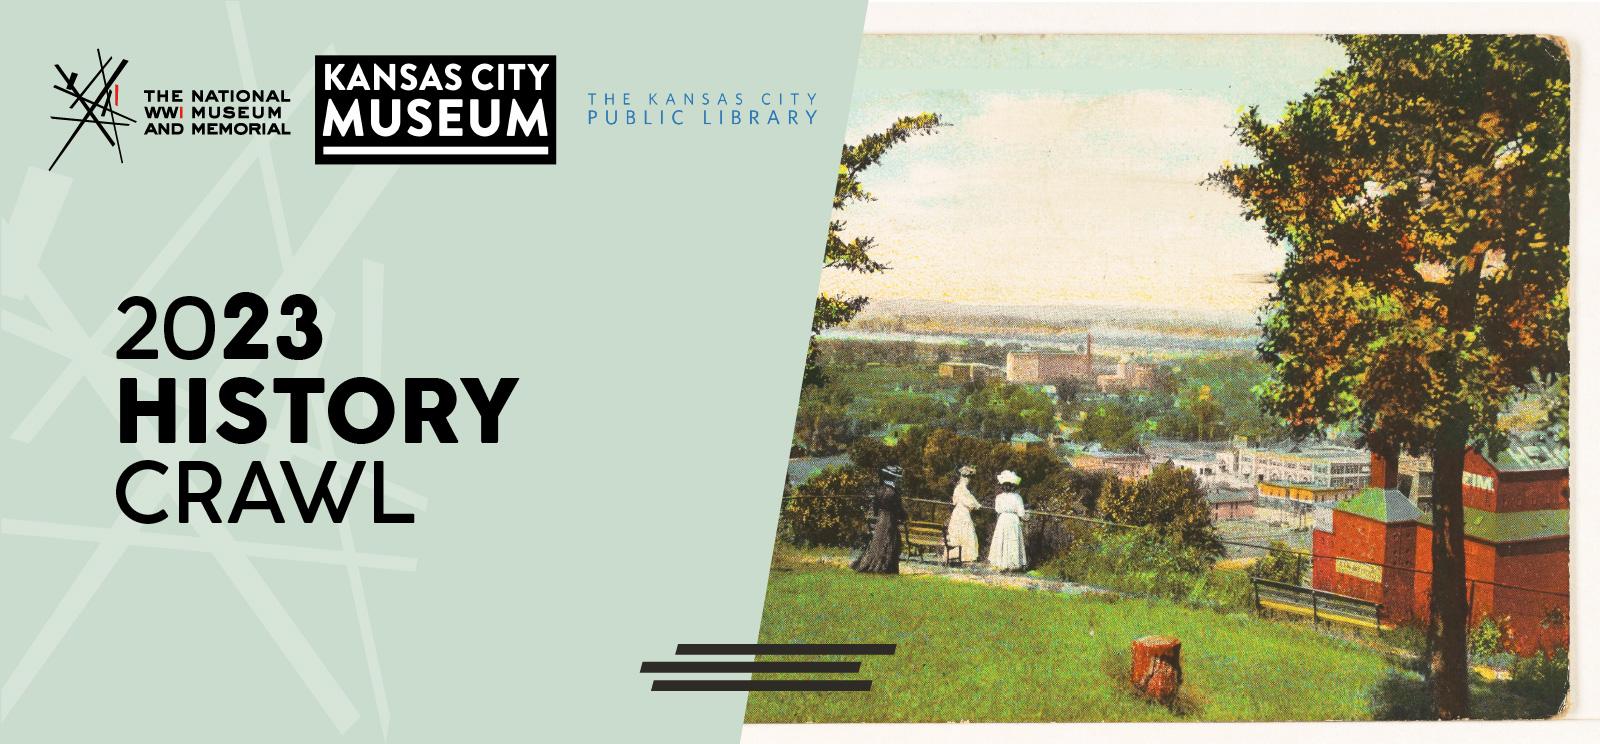 Image: Painting of a peaceful park space on a hill overlooking early Kansas City. Text: 2023 History Crawl